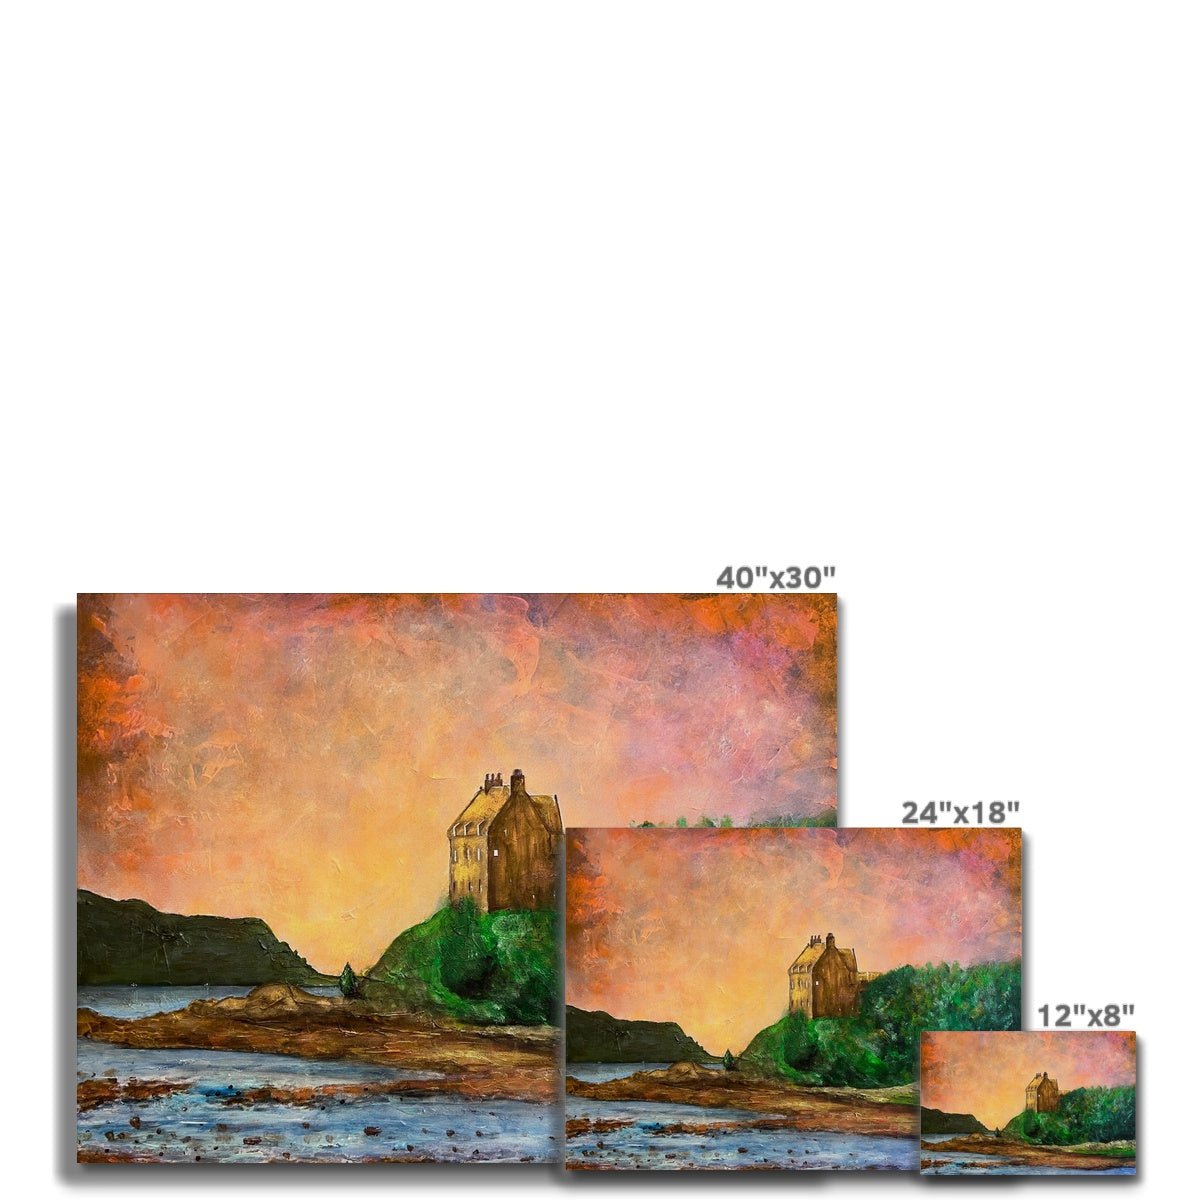 Duntrune Castle Painting | Canvas From Scotland-Contemporary Stretched Canvas Prints-Scottish Castles Art Gallery-Paintings, Prints, Homeware, Art Gifts From Scotland By Scottish Artist Kevin Hunter